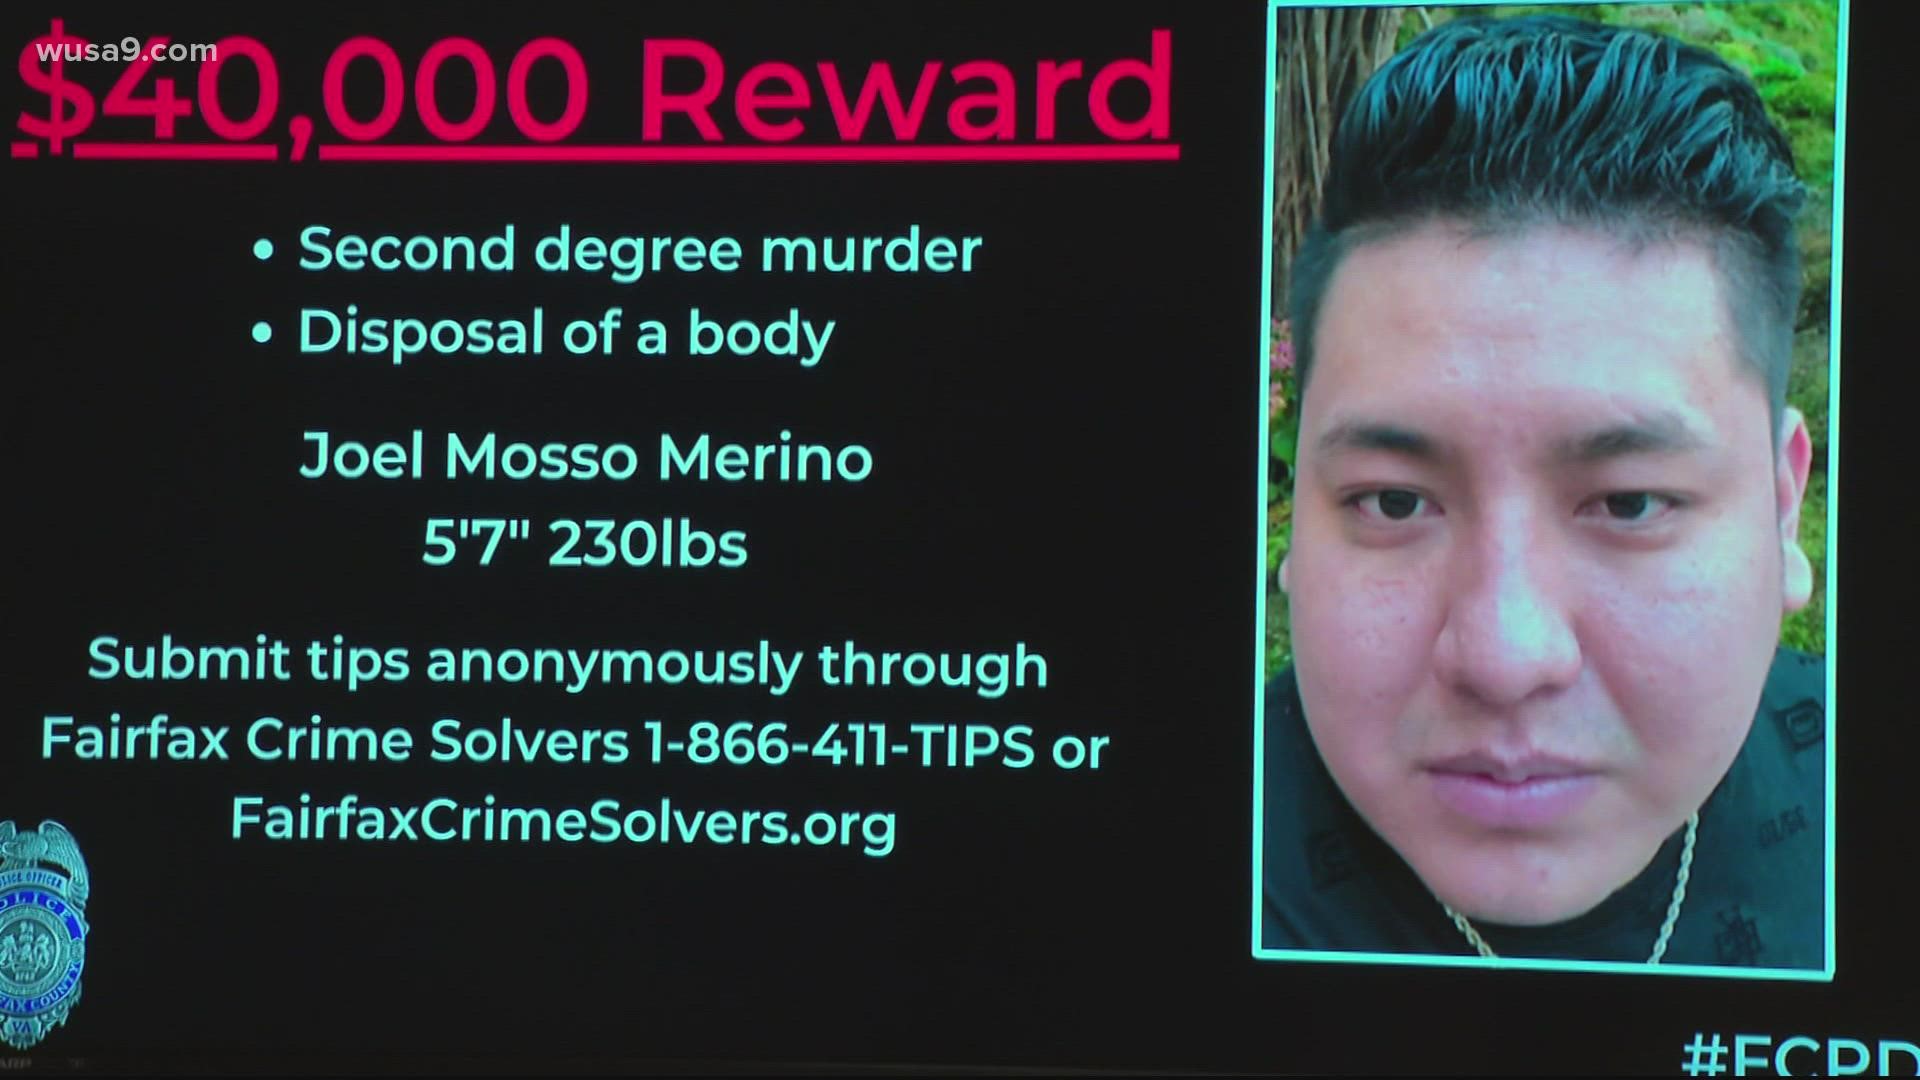 Police are offering a $40,000 reward for anyone who can provide information that can lead to the arrest of Joel Marino.